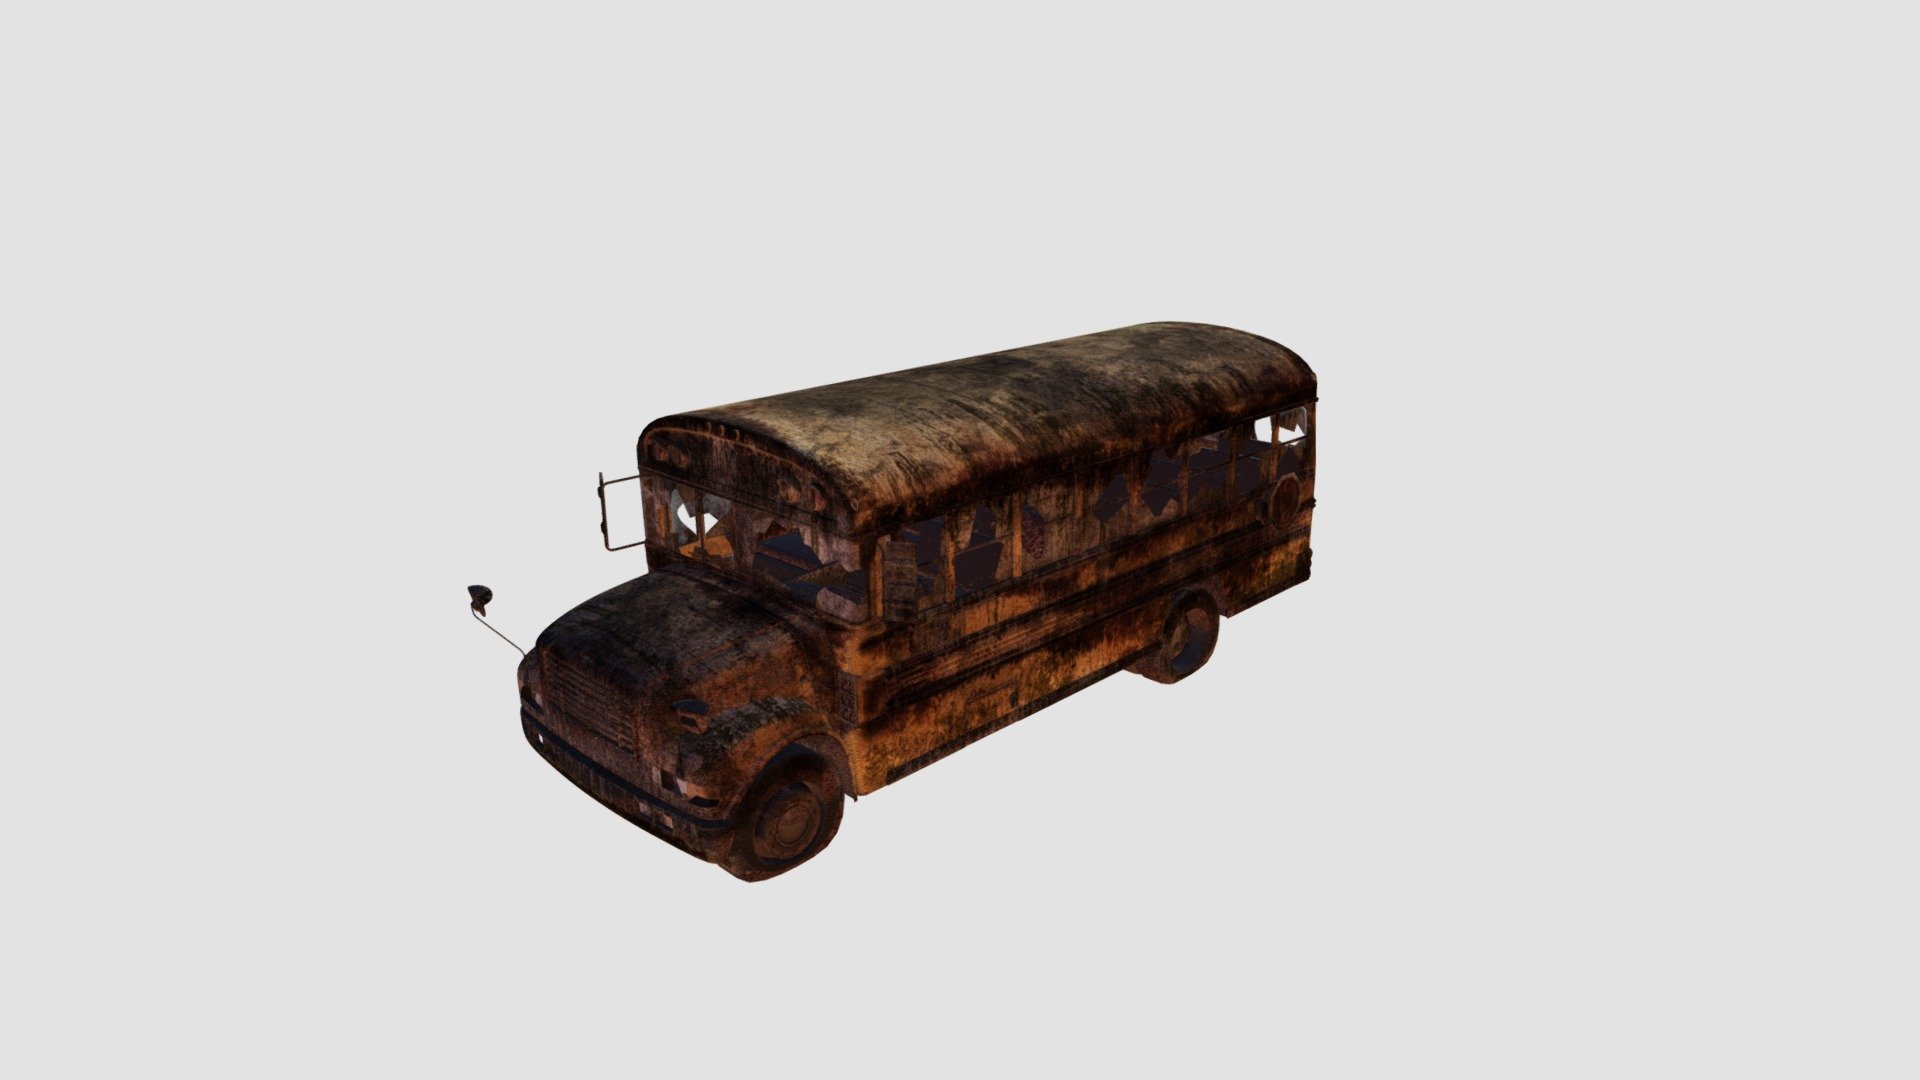 Highly detailed 3d model of destroyed bus with all textures, shaders and materials. It is ready to use, just put it into your scene 3d model